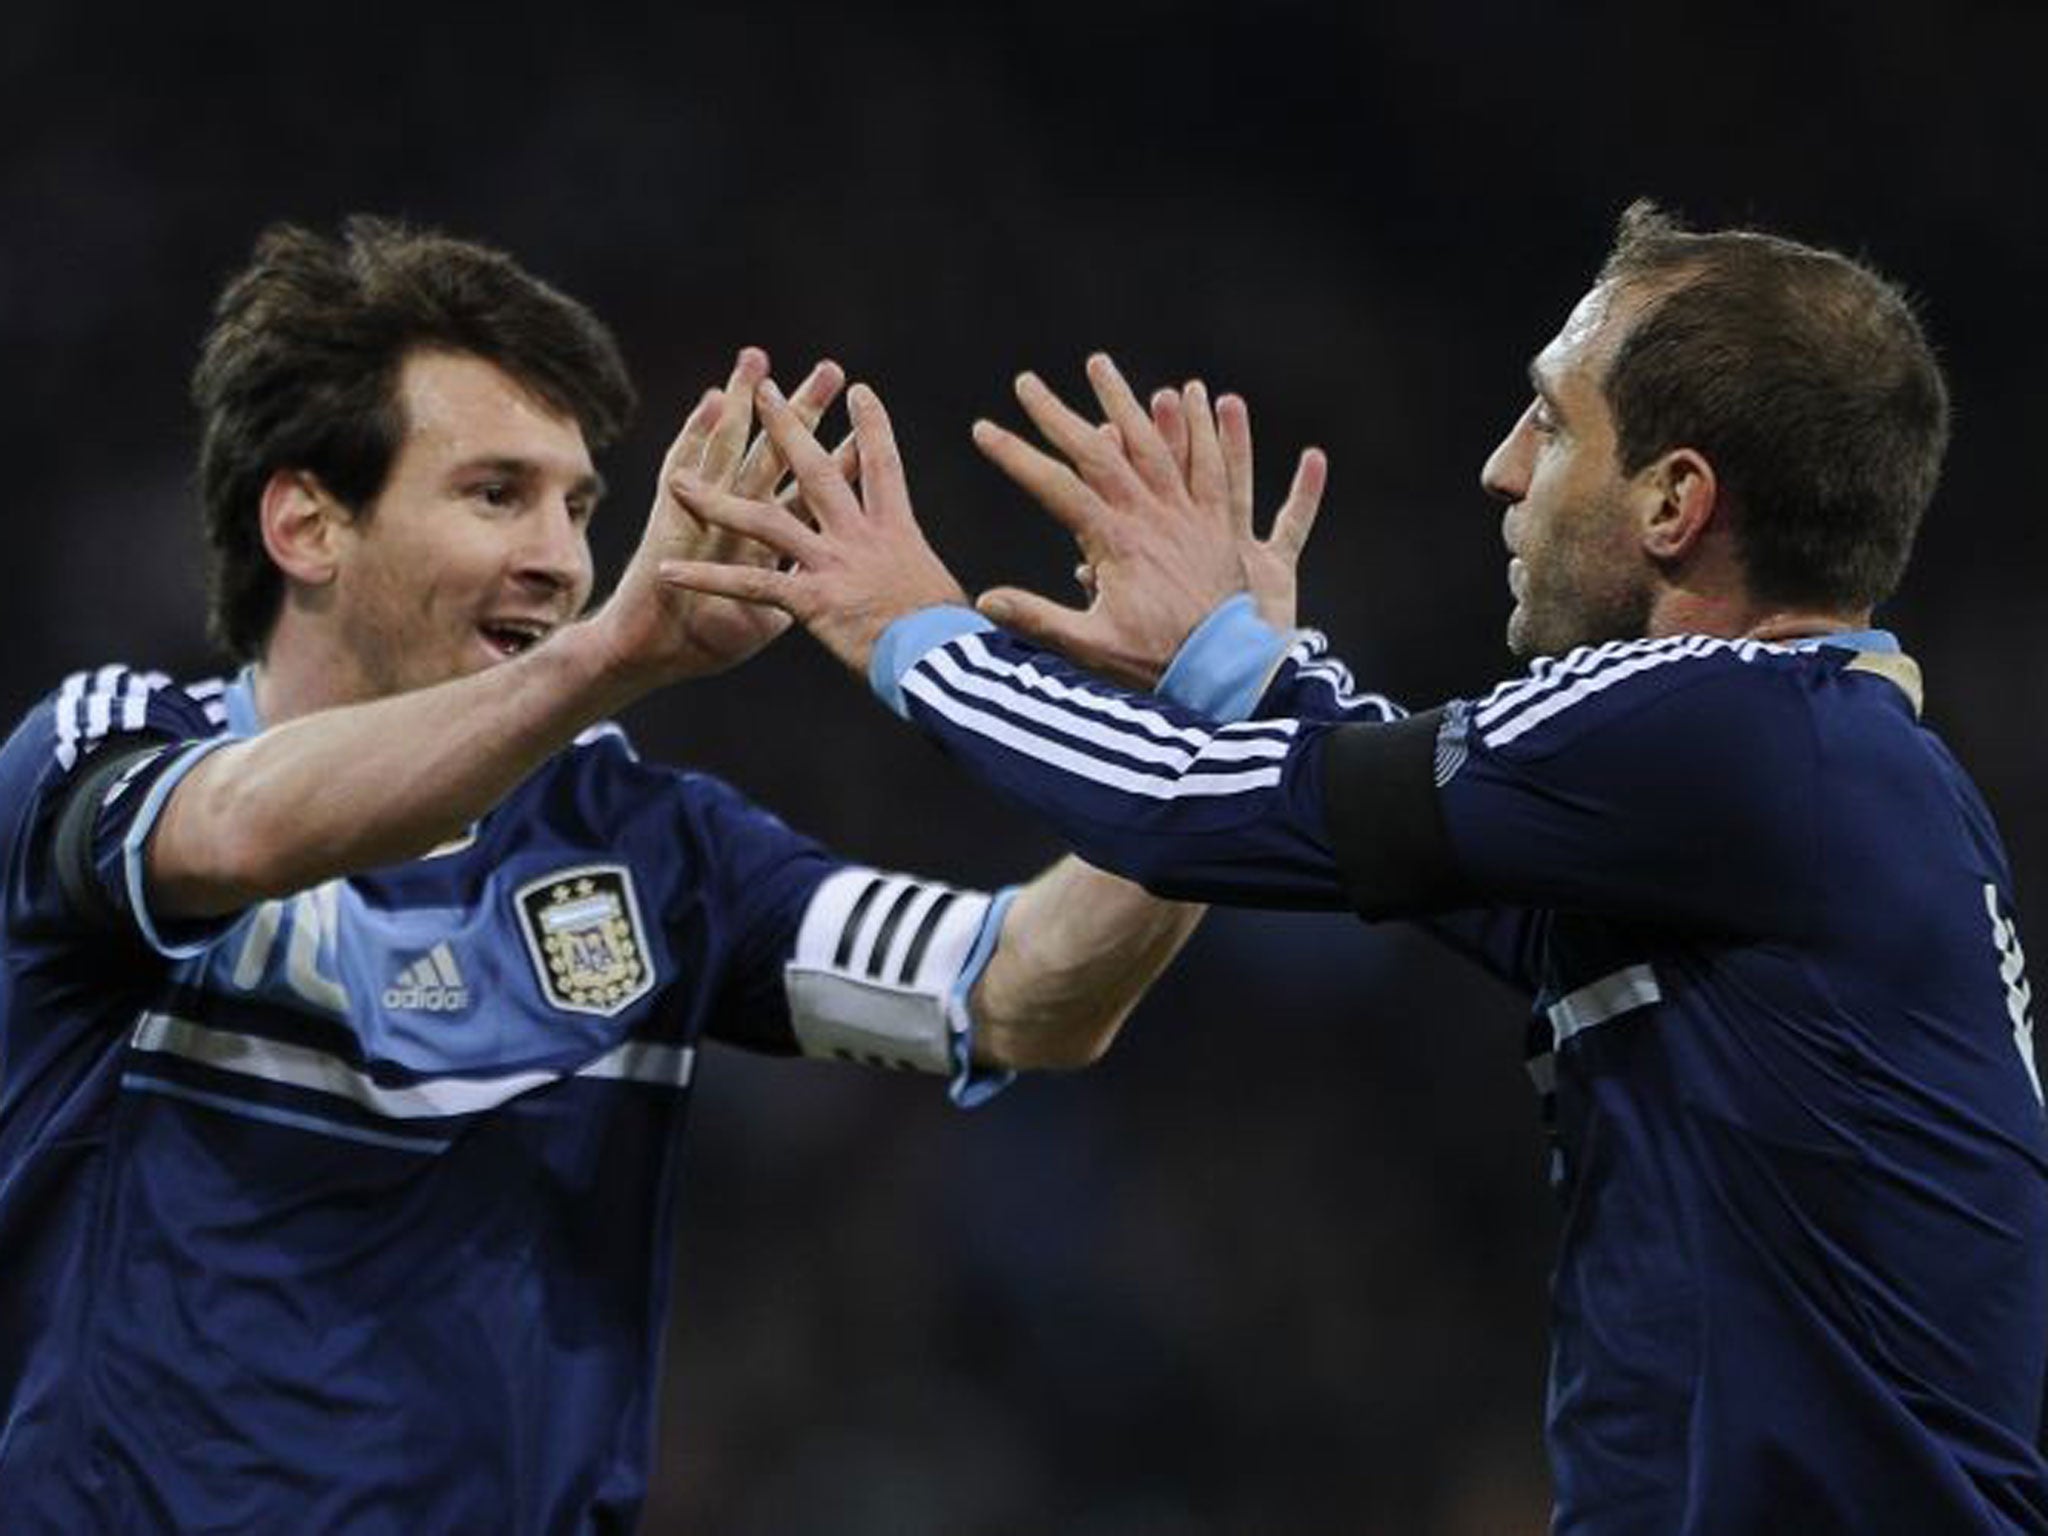 Hand it to him: Zabaleta (right) said he did not think Lionel Messi would be ‘that’ good until he saw him play for the Argentina U-20s